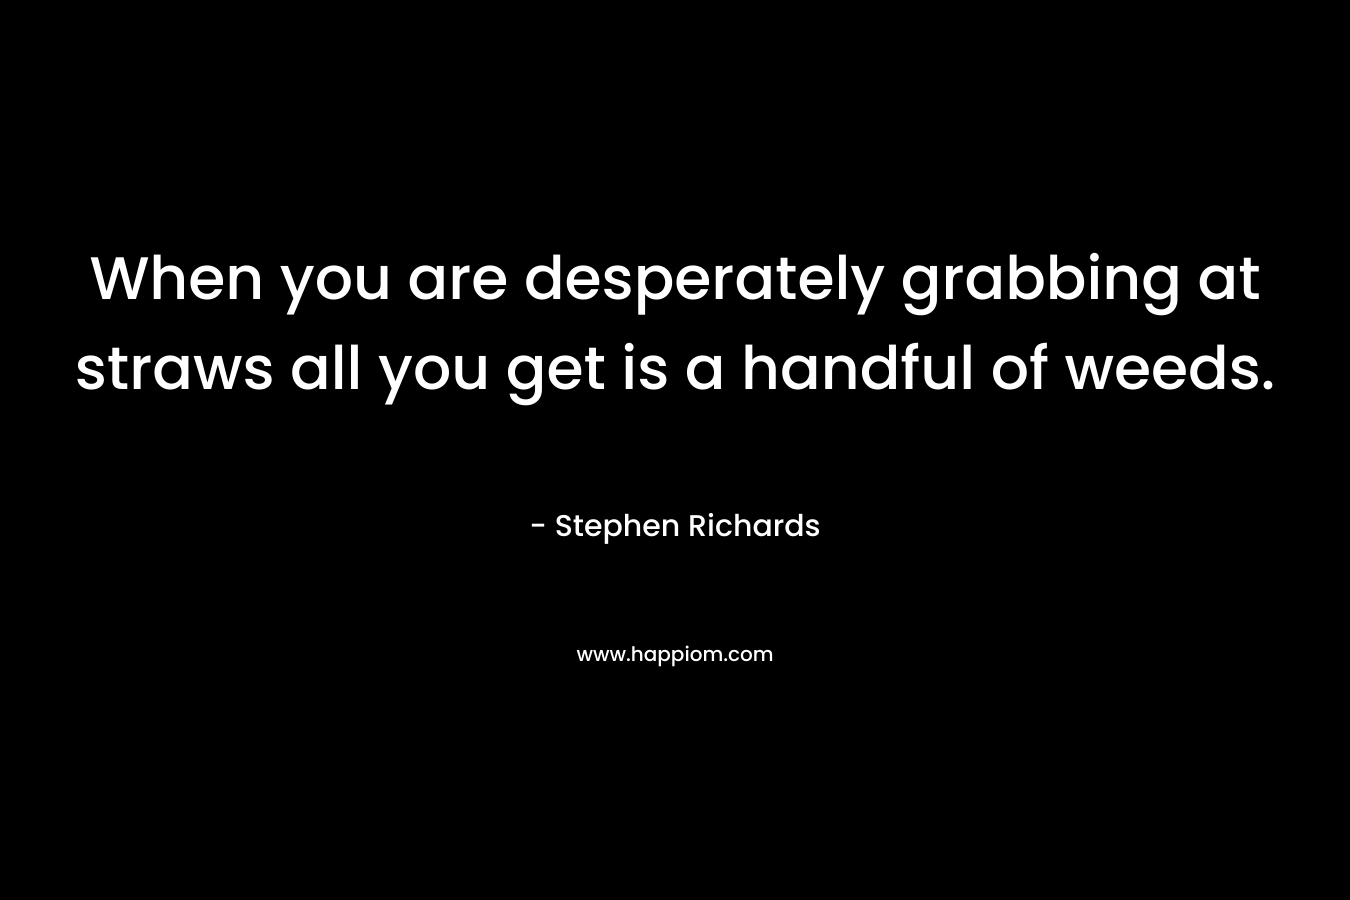 When you are desperately grabbing at straws all you get is a handful of weeds. – Stephen Richards